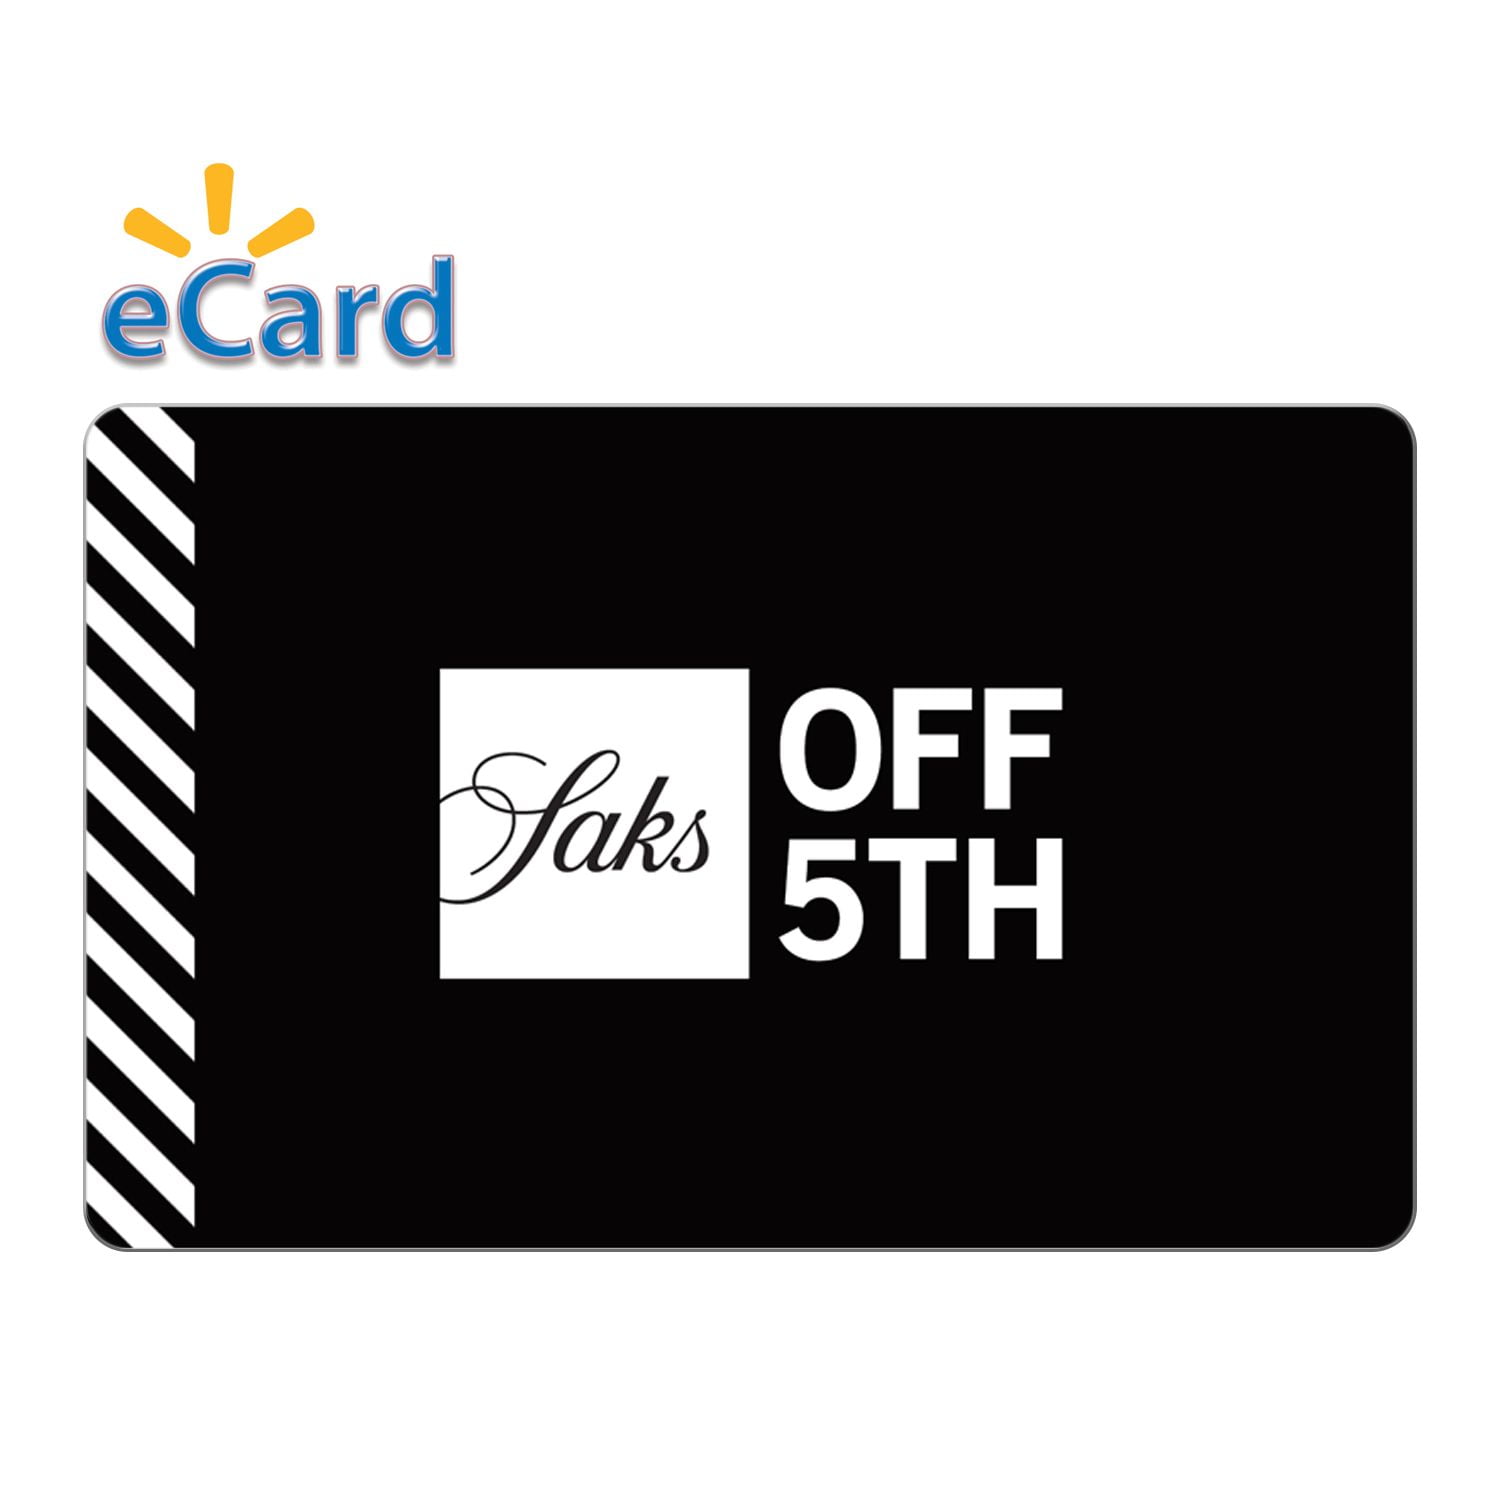 Saks OFF 5TH 25 eGift Card (Email Delivery)